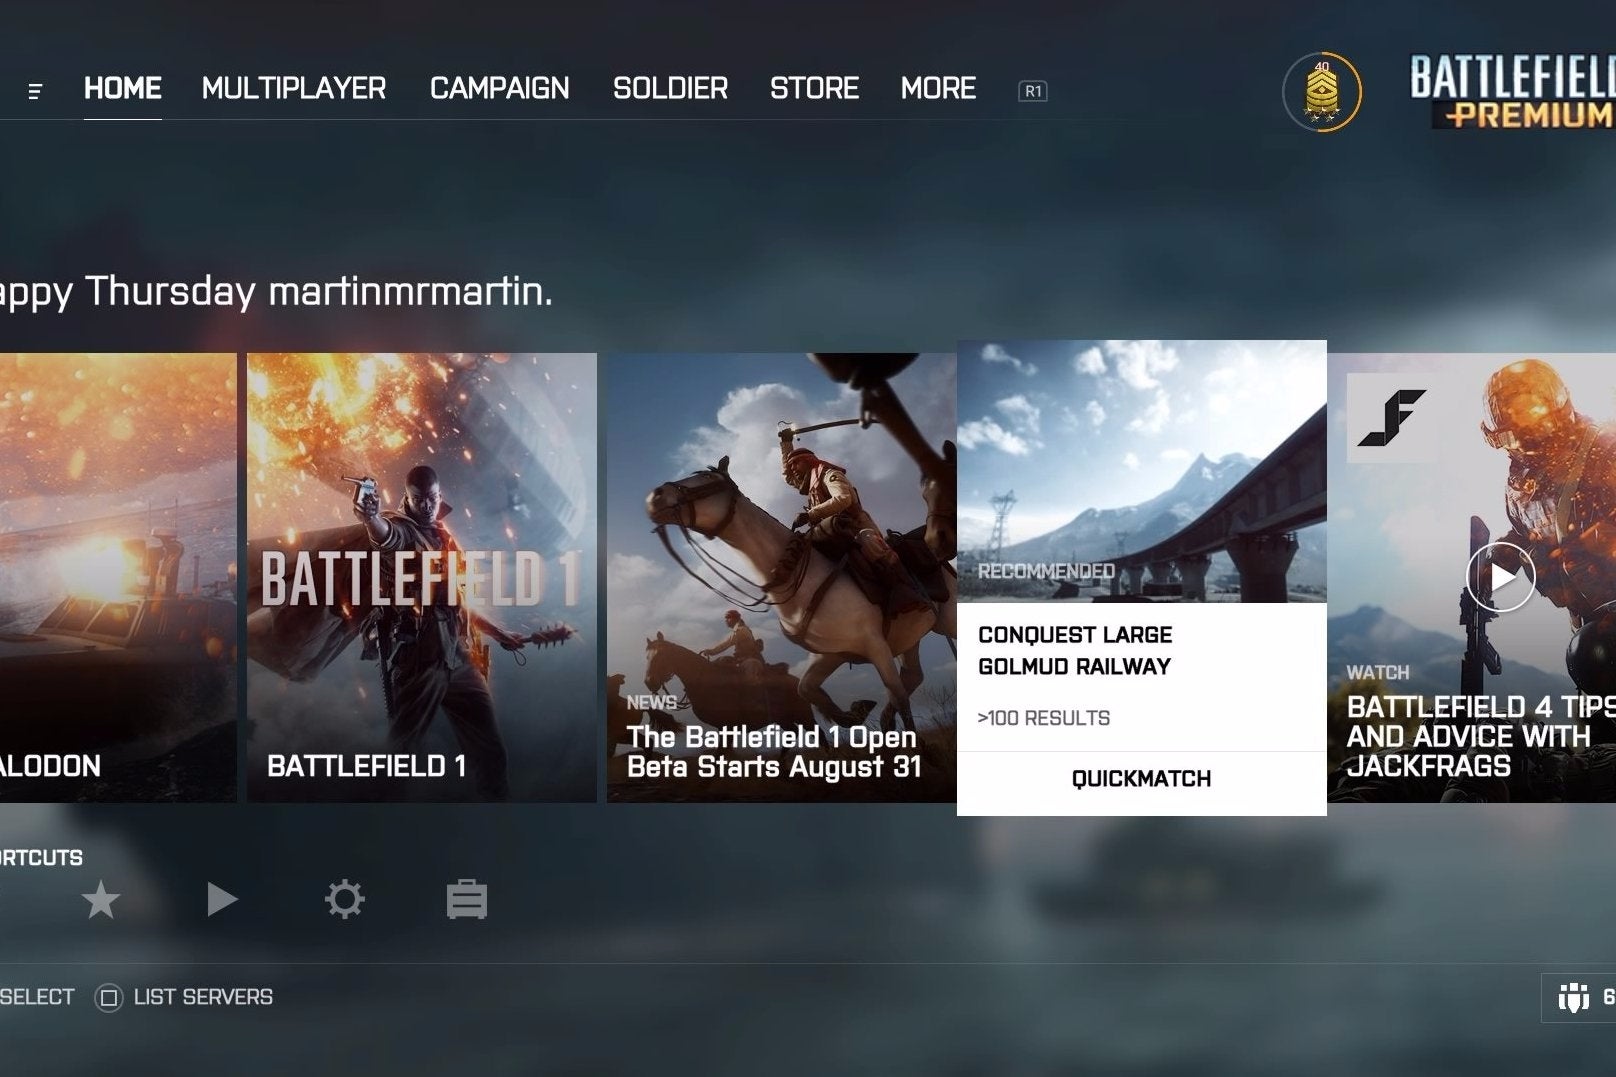 Image for Battlefield 4 just got a huge makeover on console